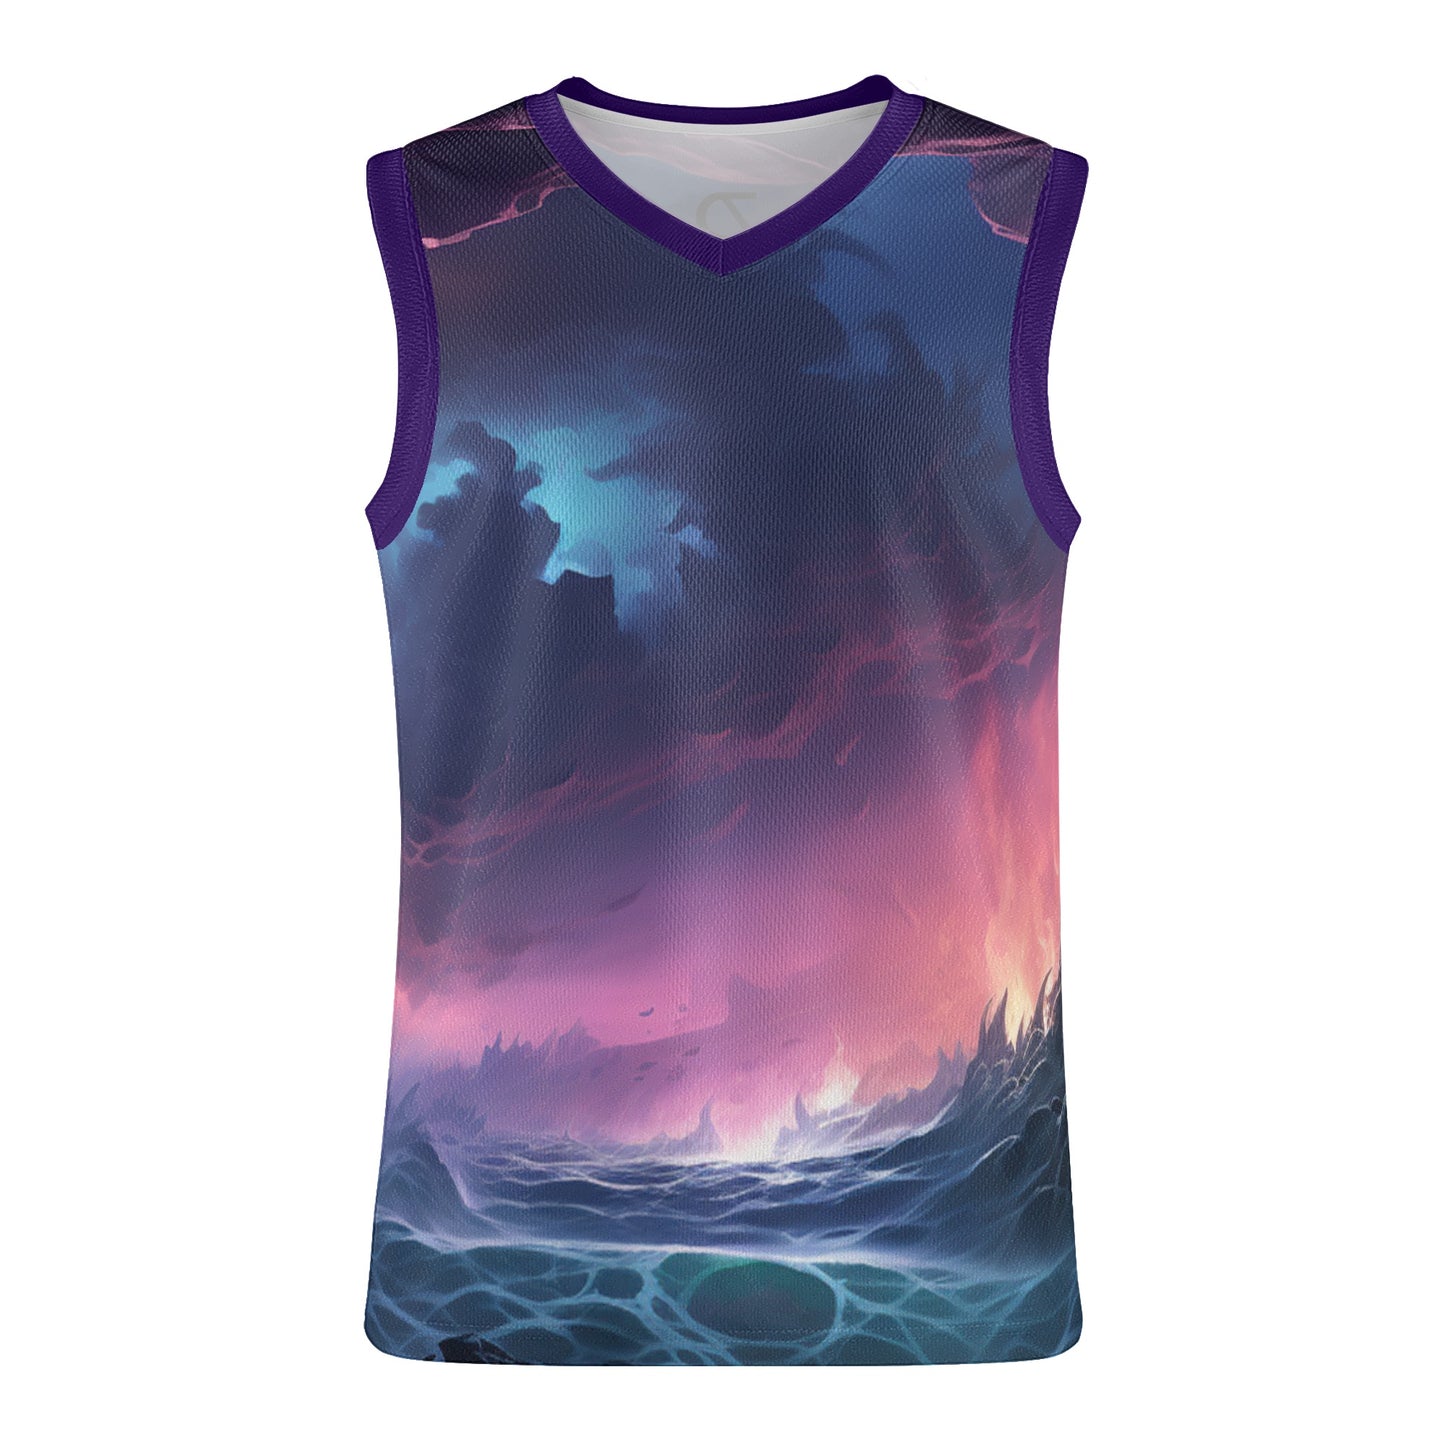 Neduz Mens Dreamscape Basketball Jersey - All Over Print, Sublimated, Breathable, Athletic